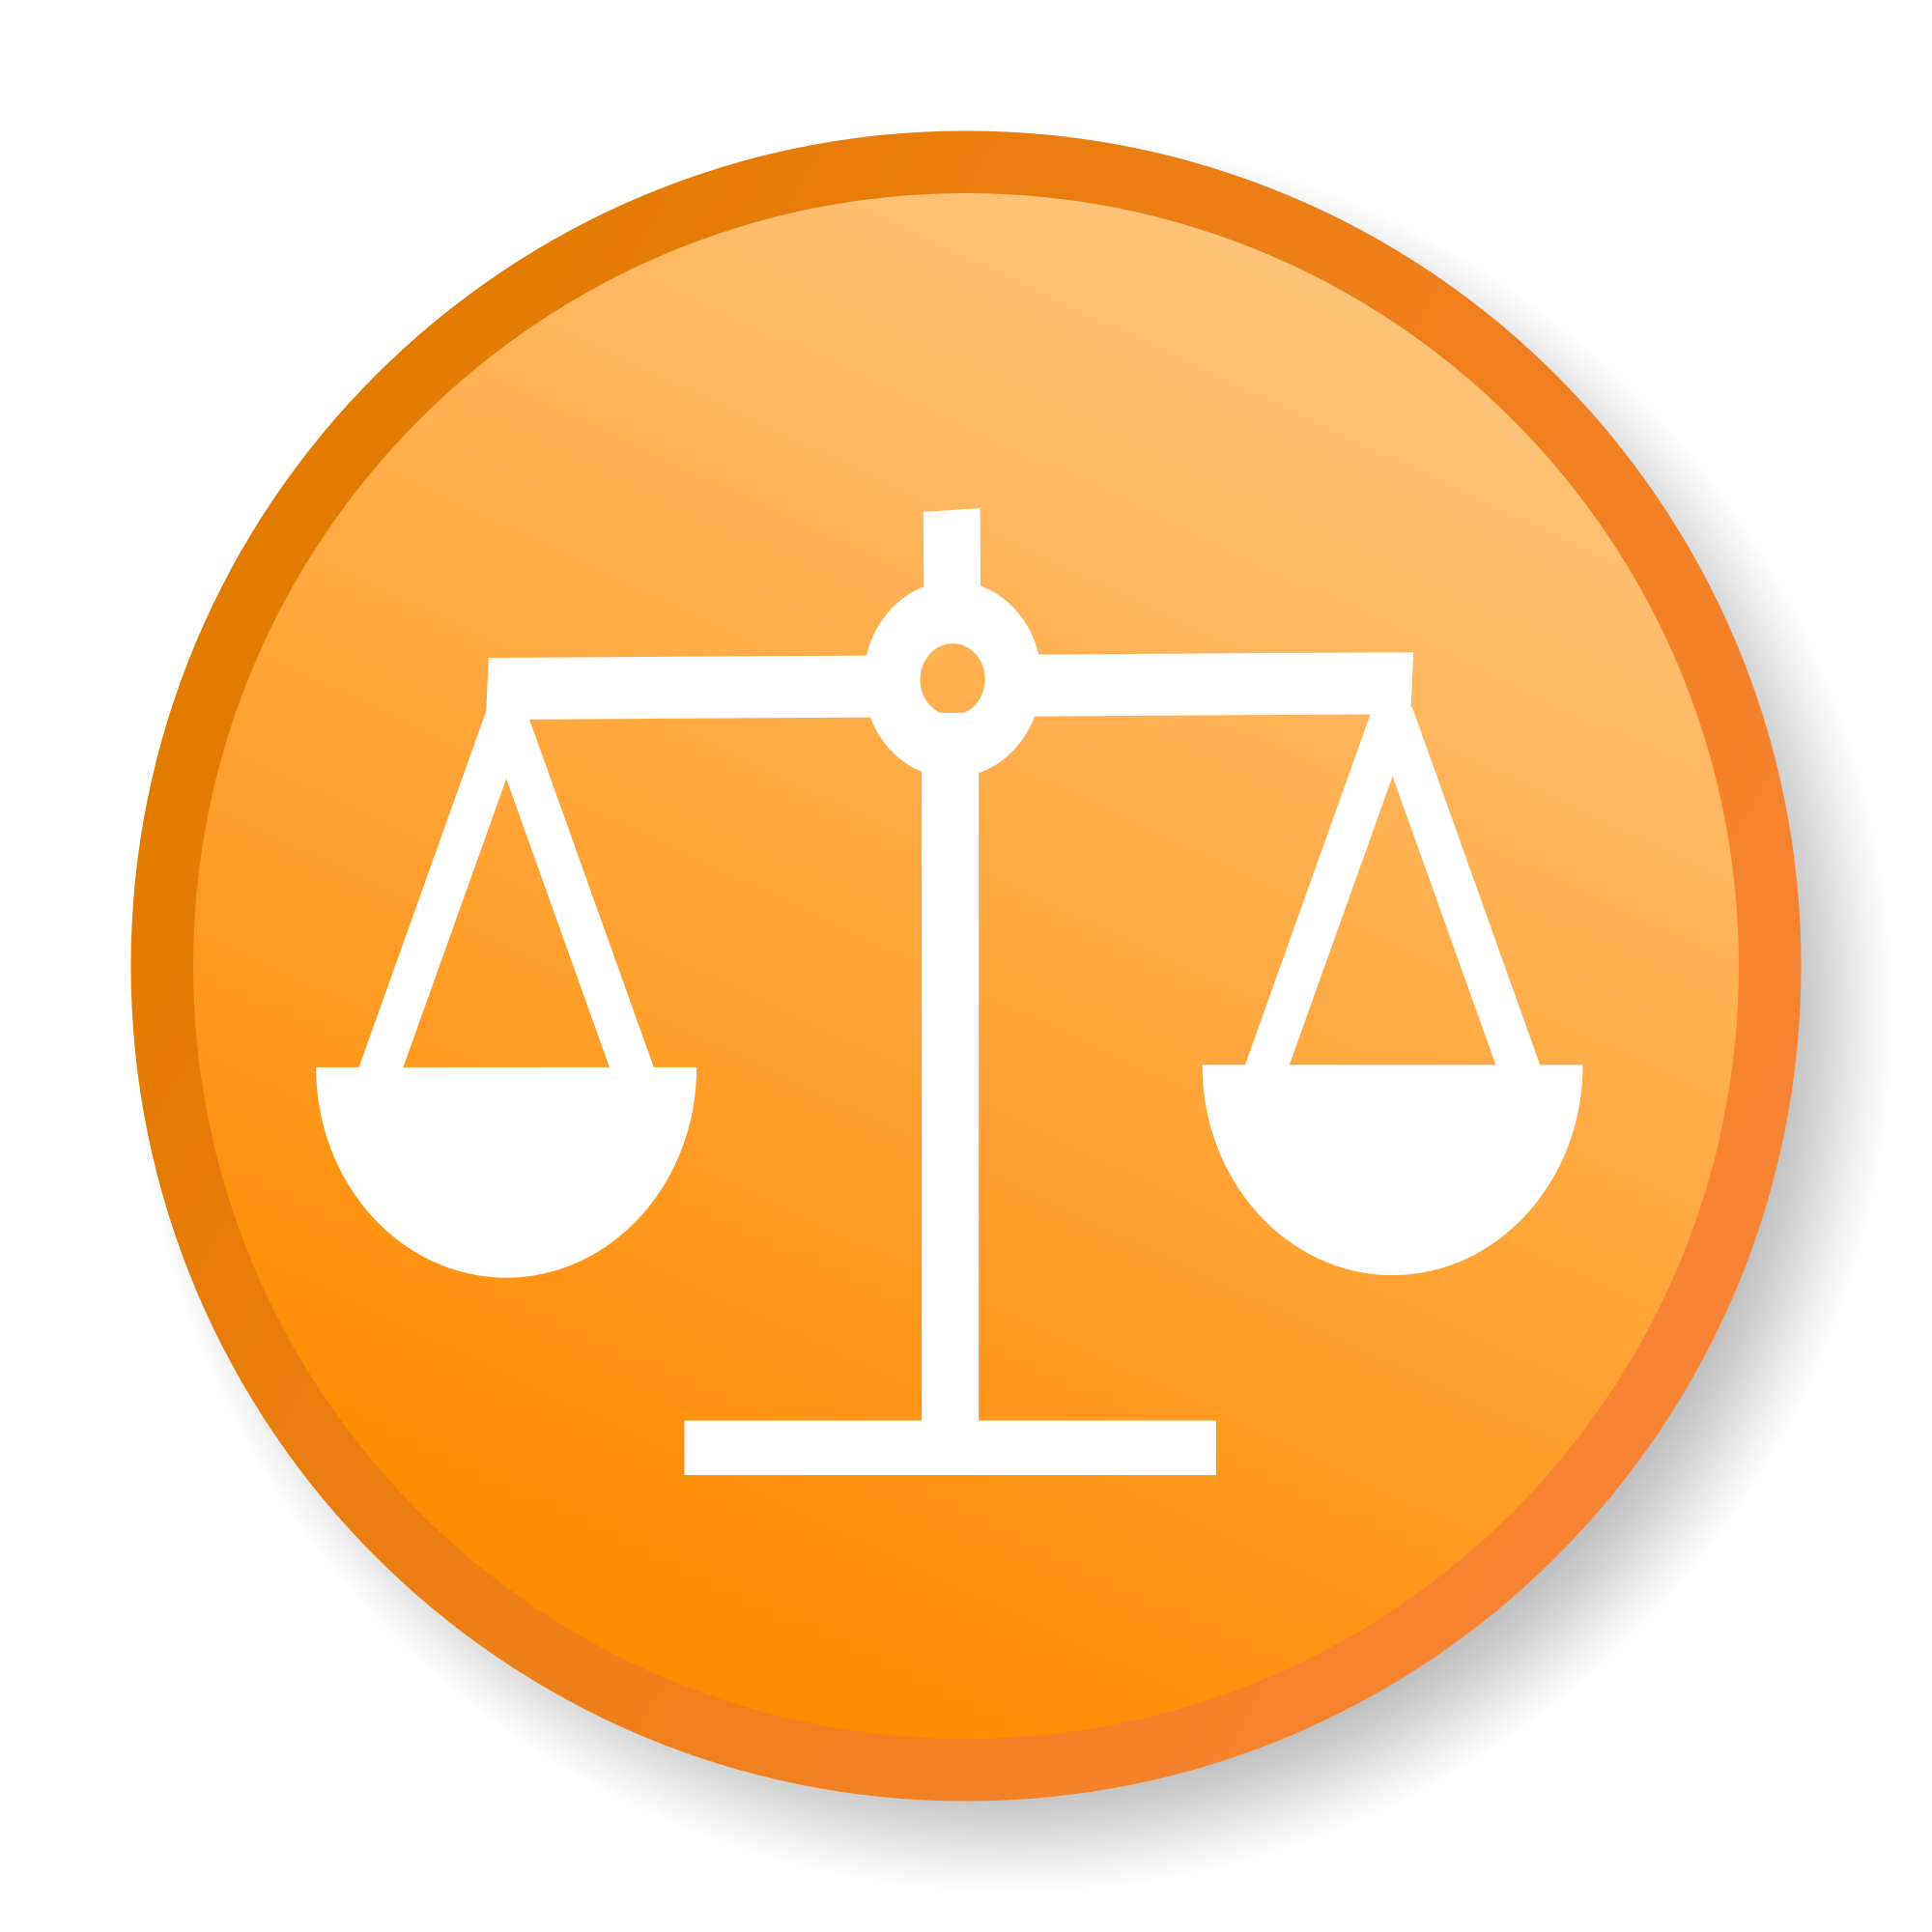 Justice scales icon #423 - Free Icons and PNG Backgrounds